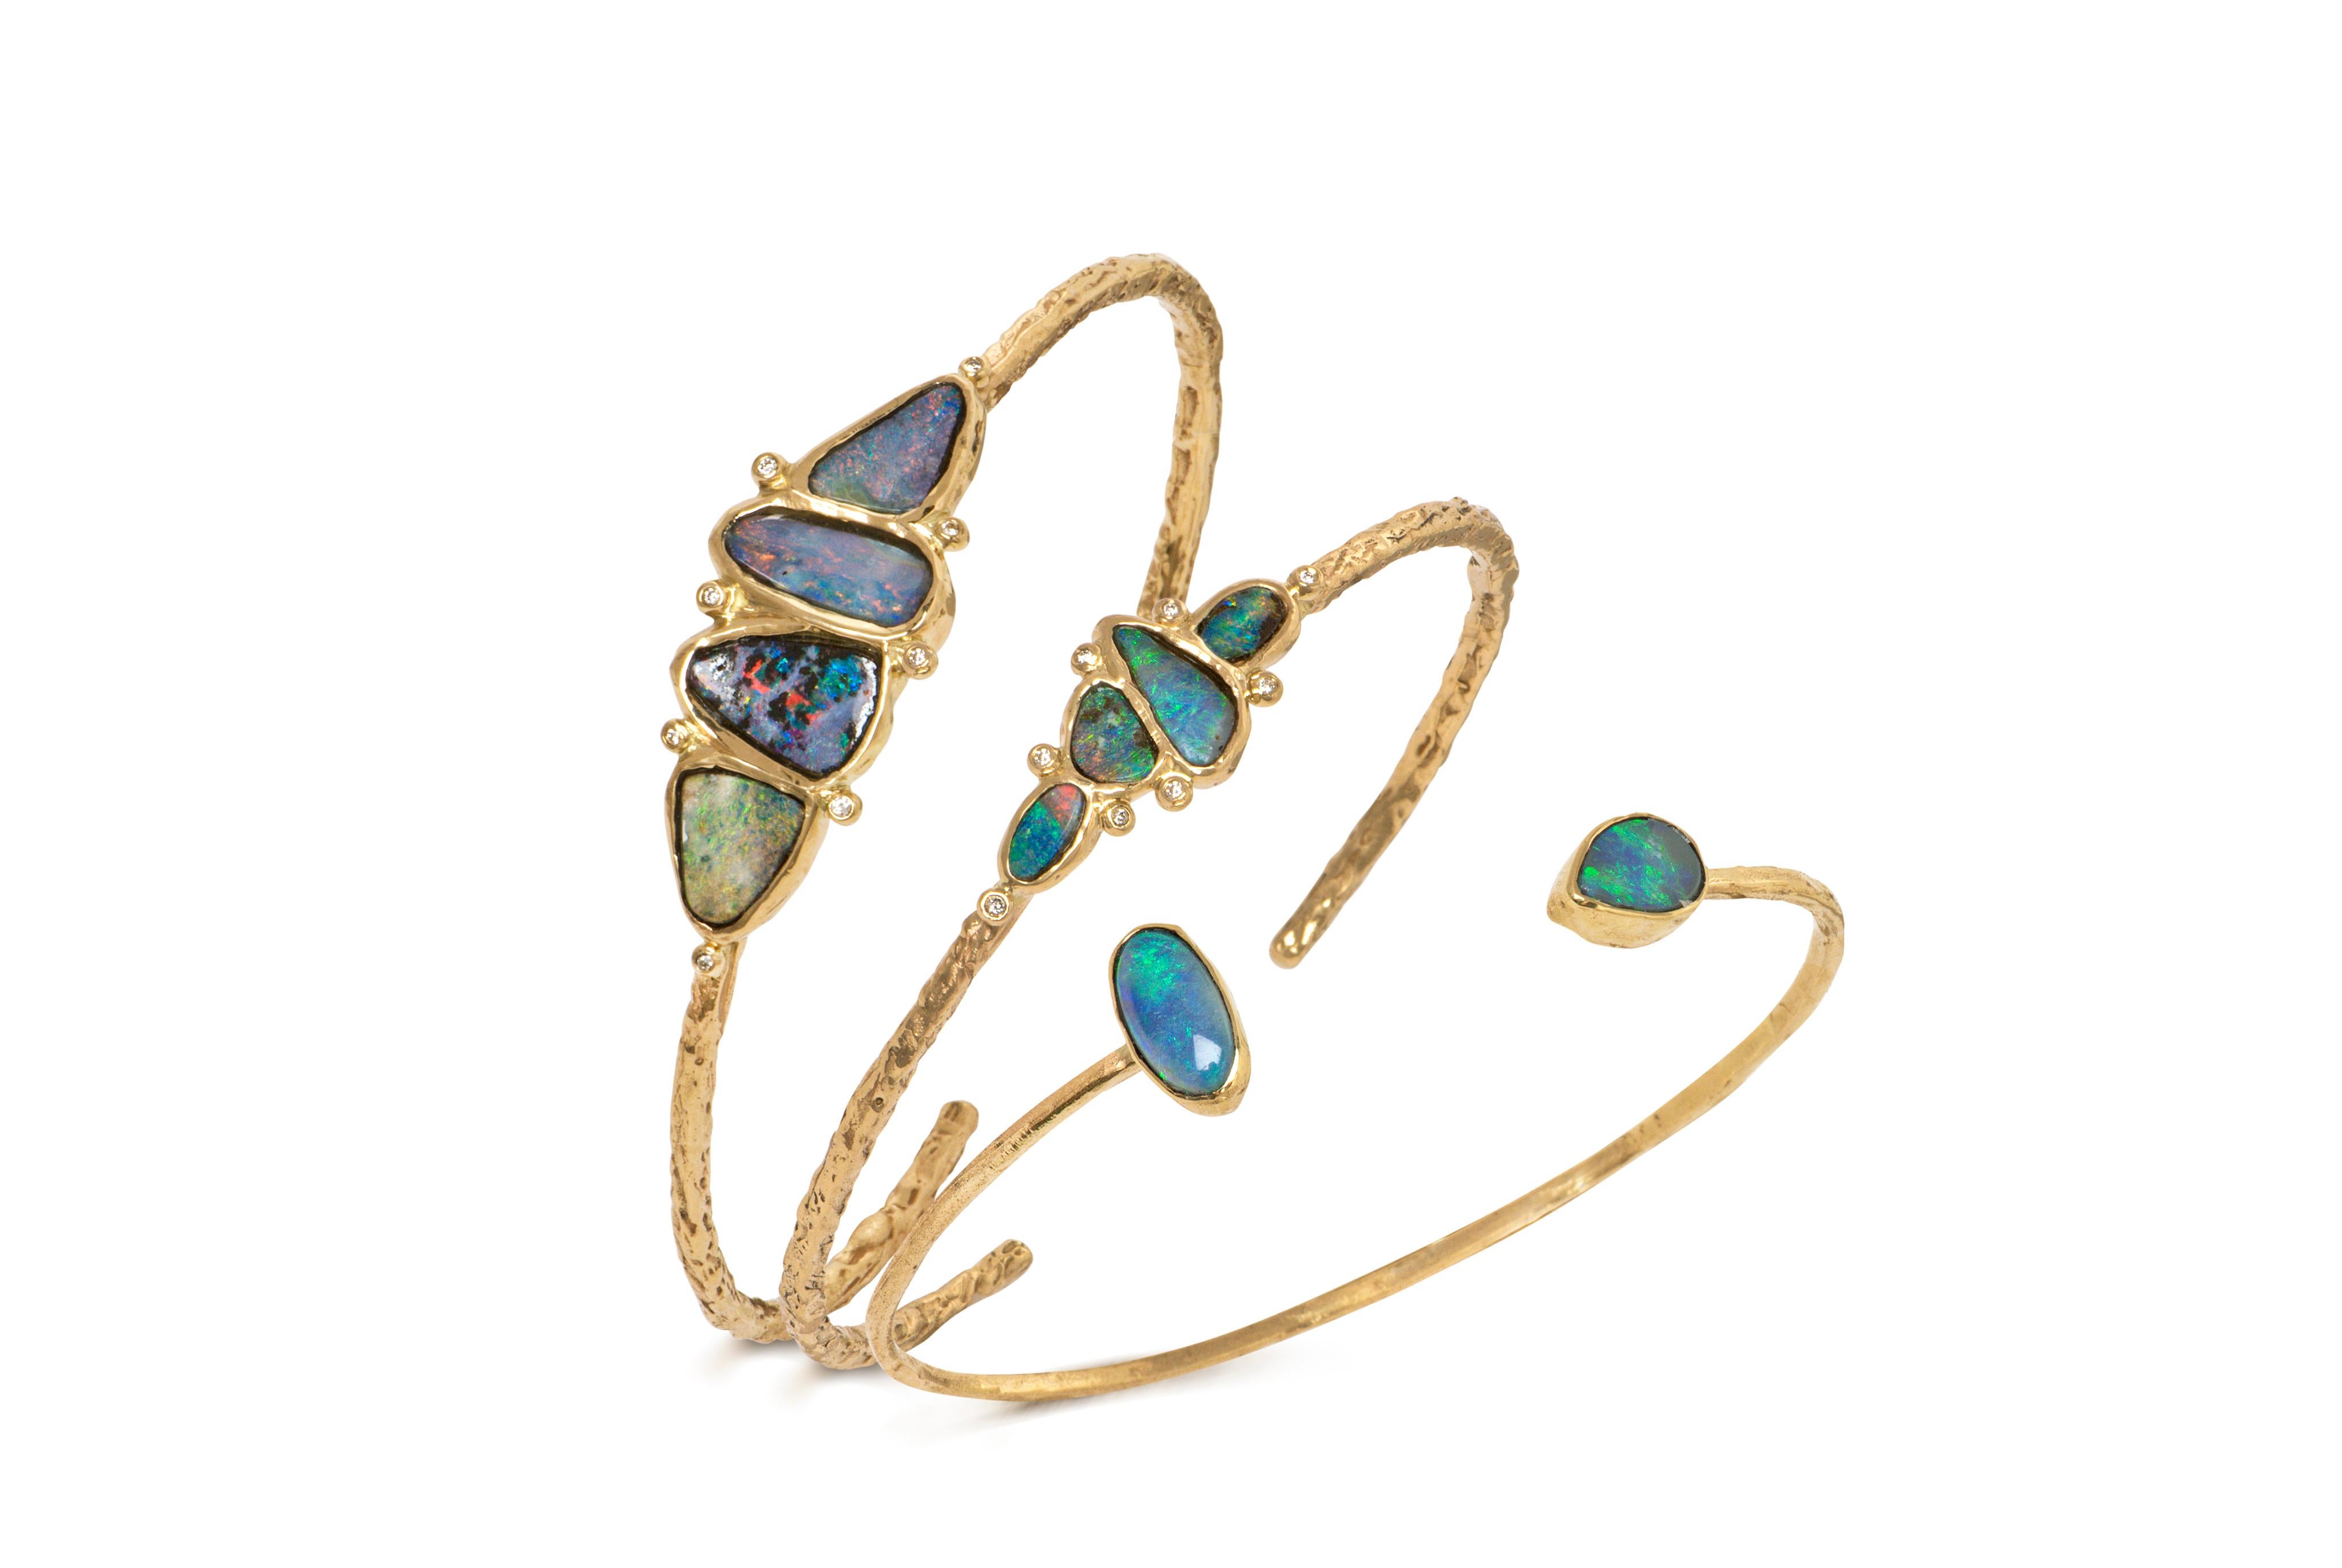 One of a Kind Cuff Bracelet handcrafted by  jewelry designer Julie Romanenko in intricately-textured 14k yellow gold showcasing four stunning boulder opals bezel-set and accented with 0.06 total carats of round brilliant-cut white diamonds. Signed